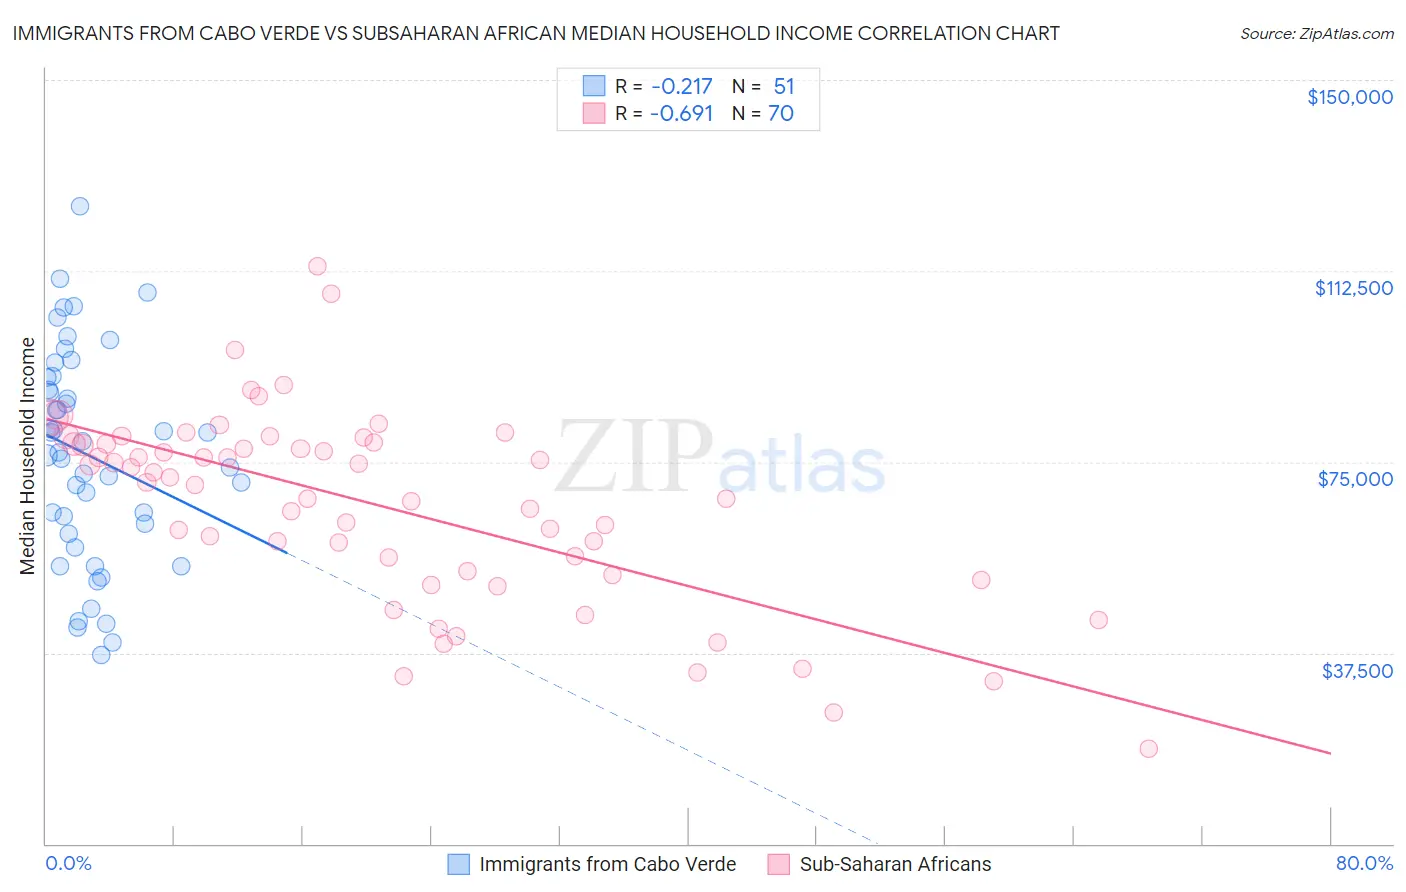 Immigrants from Cabo Verde vs Subsaharan African Median Household Income